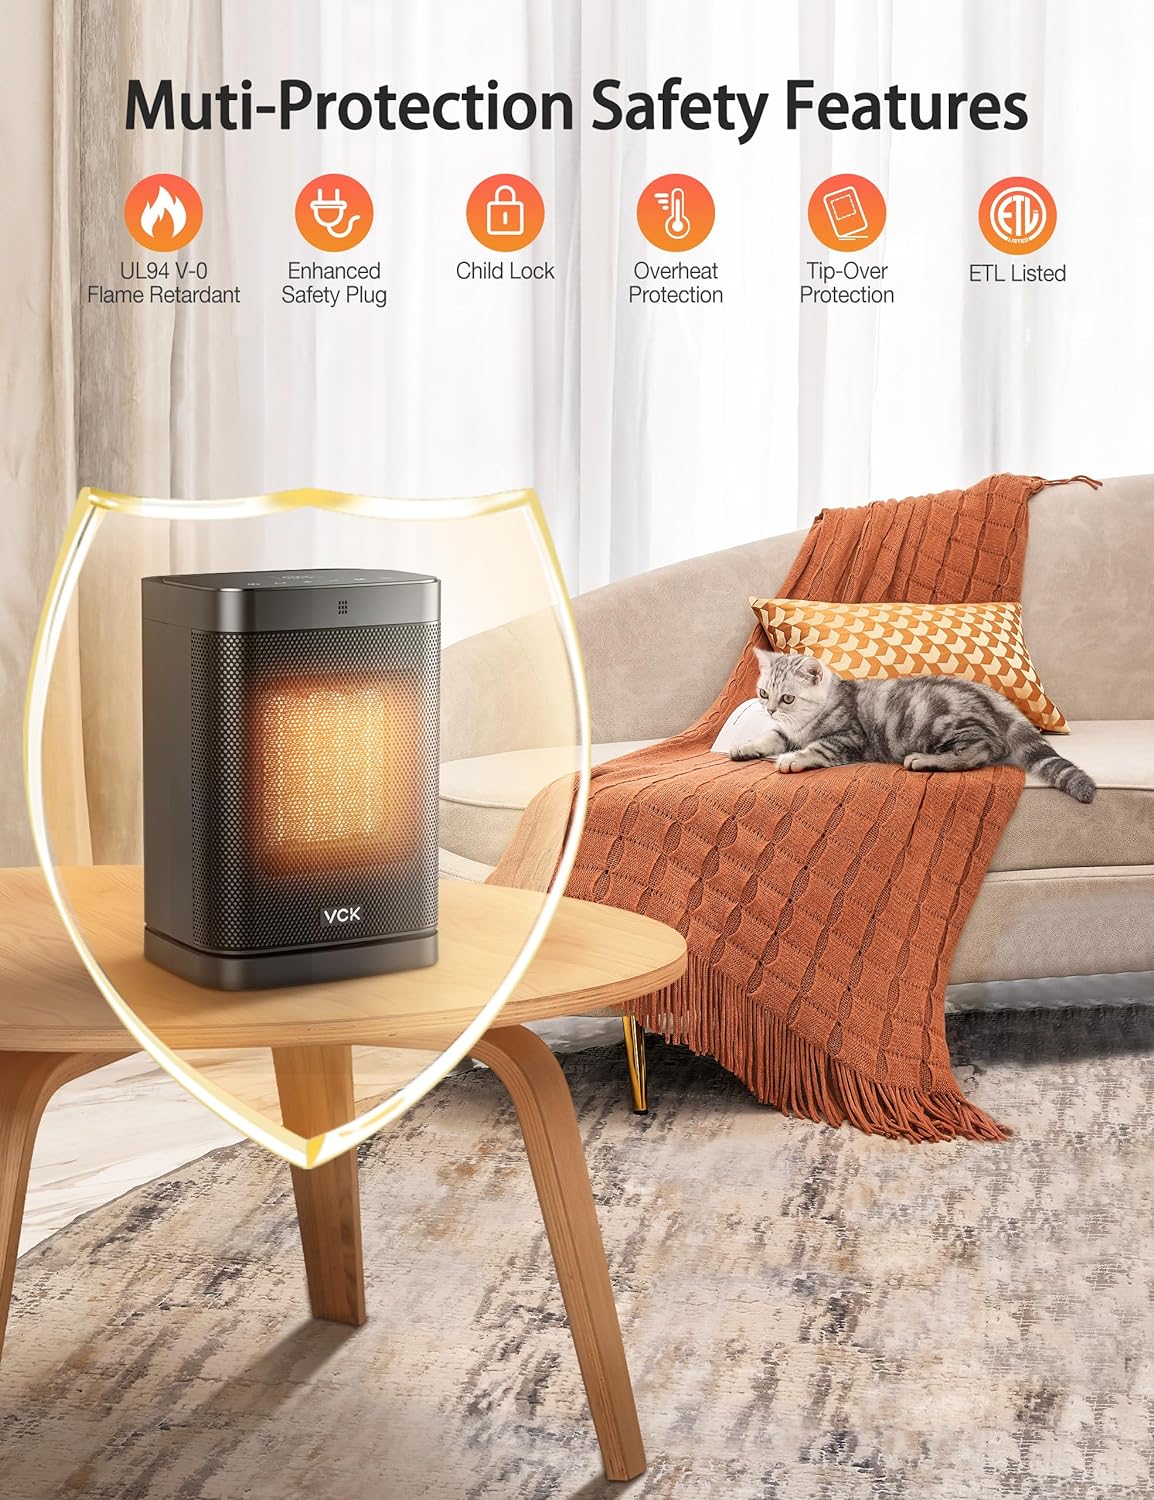 Space Heater,VCK 24 12ft/s Fast Quiet Heating Portable Electric Heater with Remote, Night Light,80° Oscillation,4 Modes,OverheatingTip-Over Protection, Ceramic Heater for Bedroom,OfficeIndoor Use